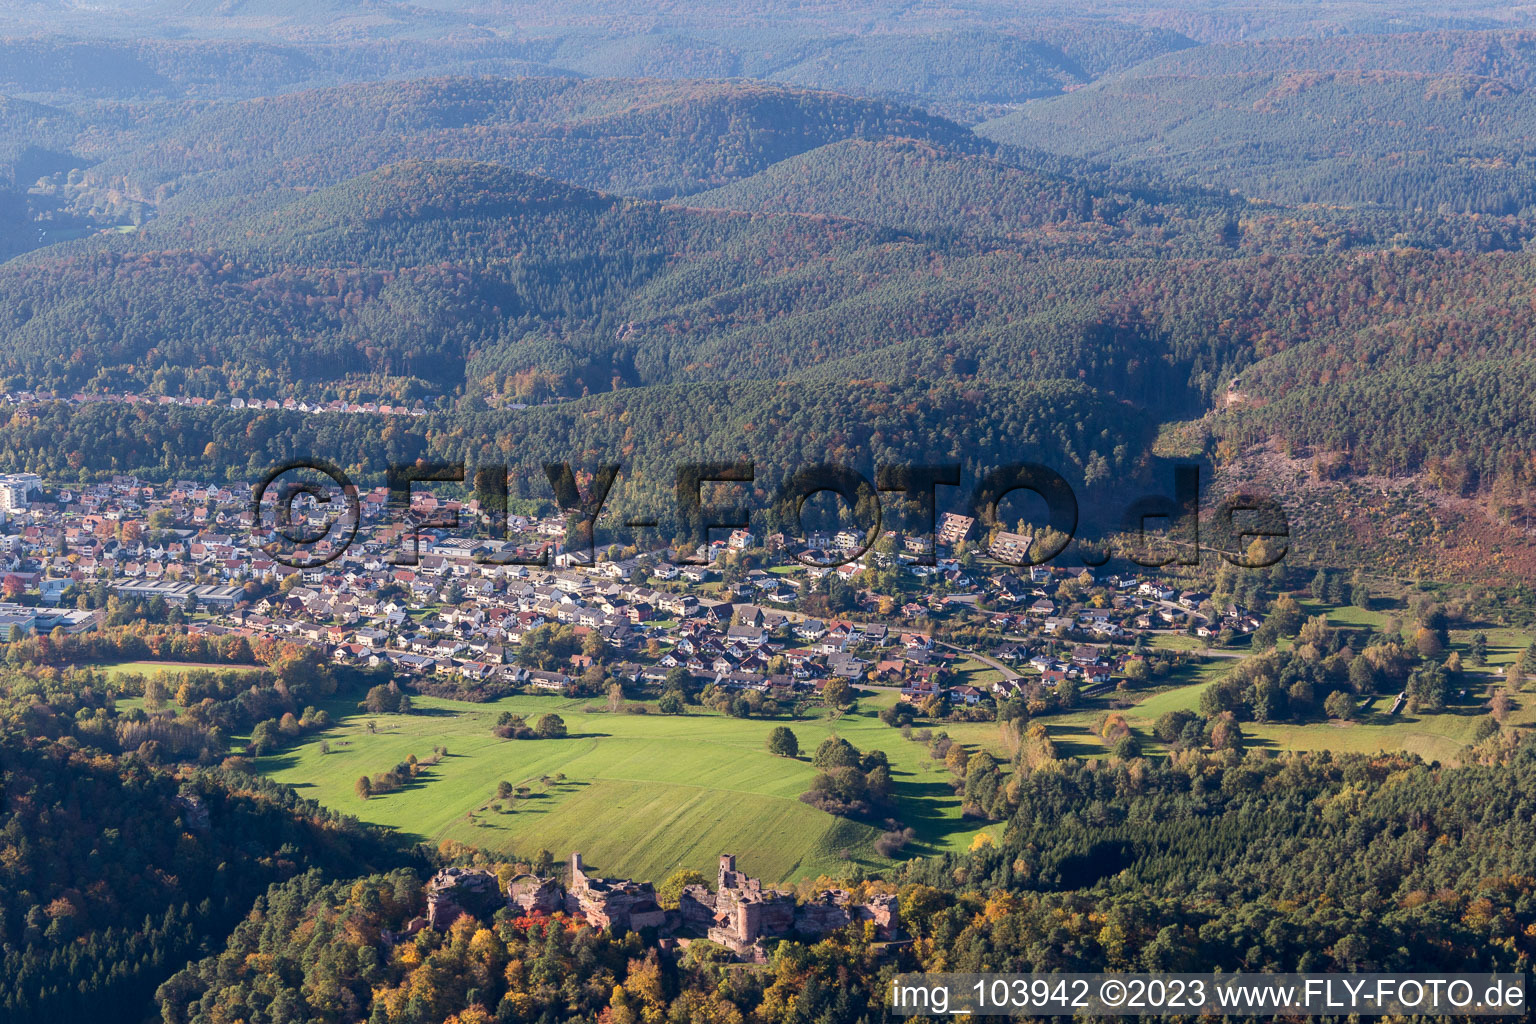 Erfweiler in the state Rhineland-Palatinate, Germany